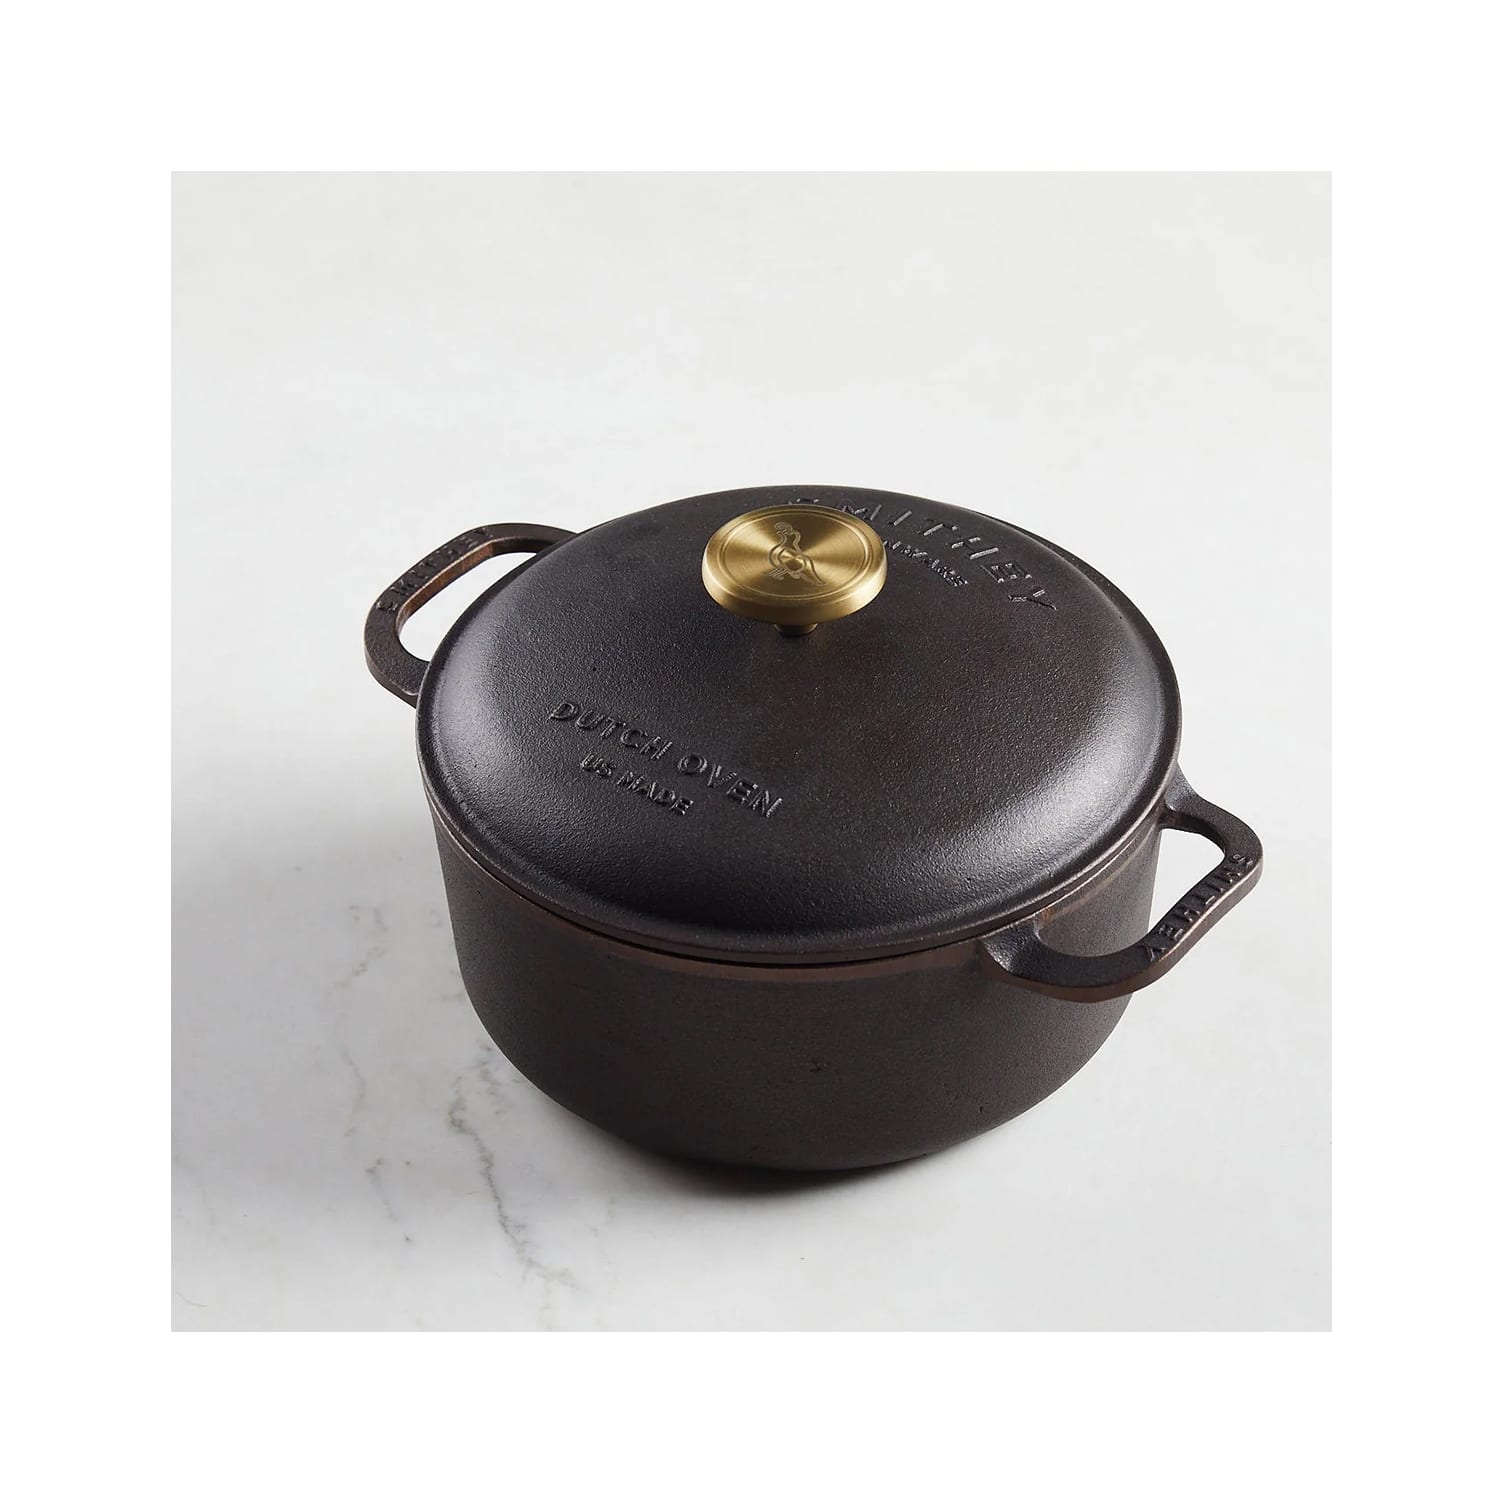 Score Nearly 50% Off This Lodge Cast Iron Dutch Oven on Cyber Monday –  SheKnows